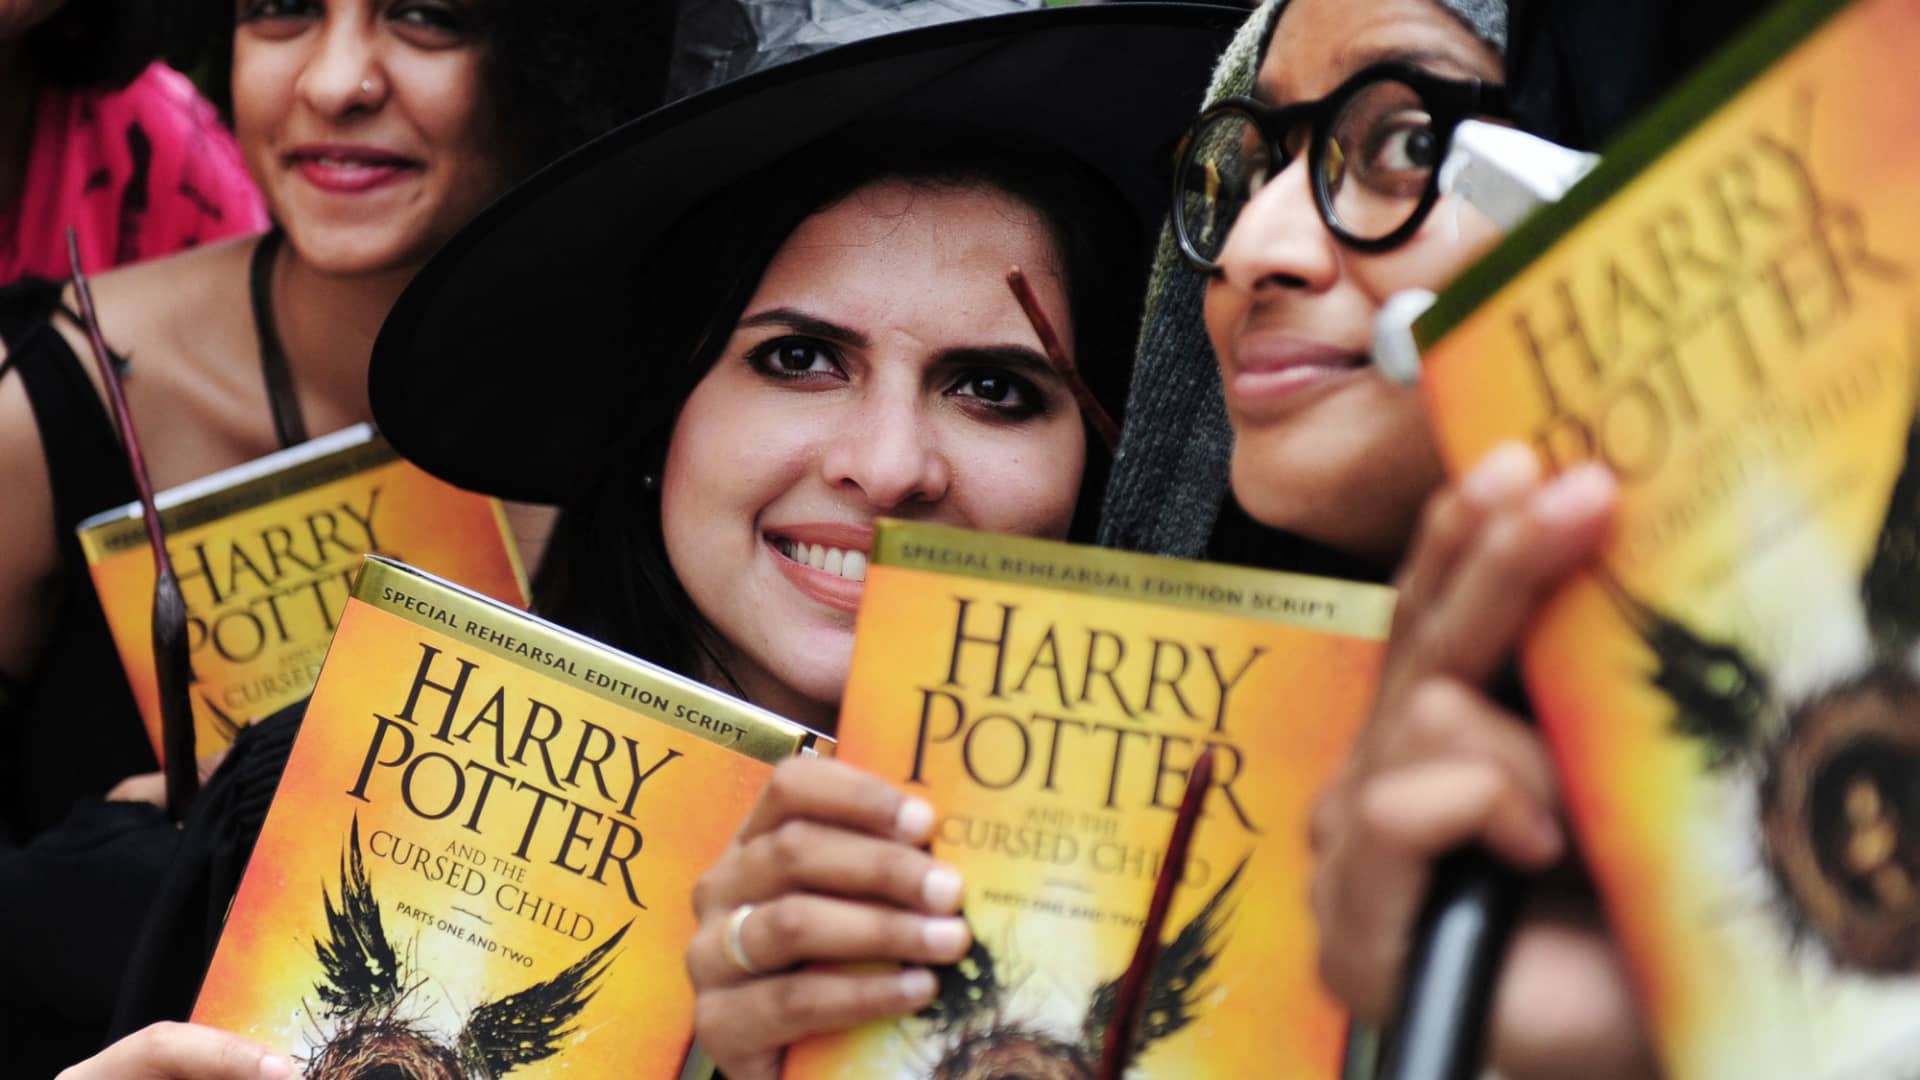 People pose for photgraphers with copies of J.K. Rowlings new book 'Harry Potter and the Cursed Child' during an event to mark the book launch at a mall in Chennai, India on July 31, 2016.